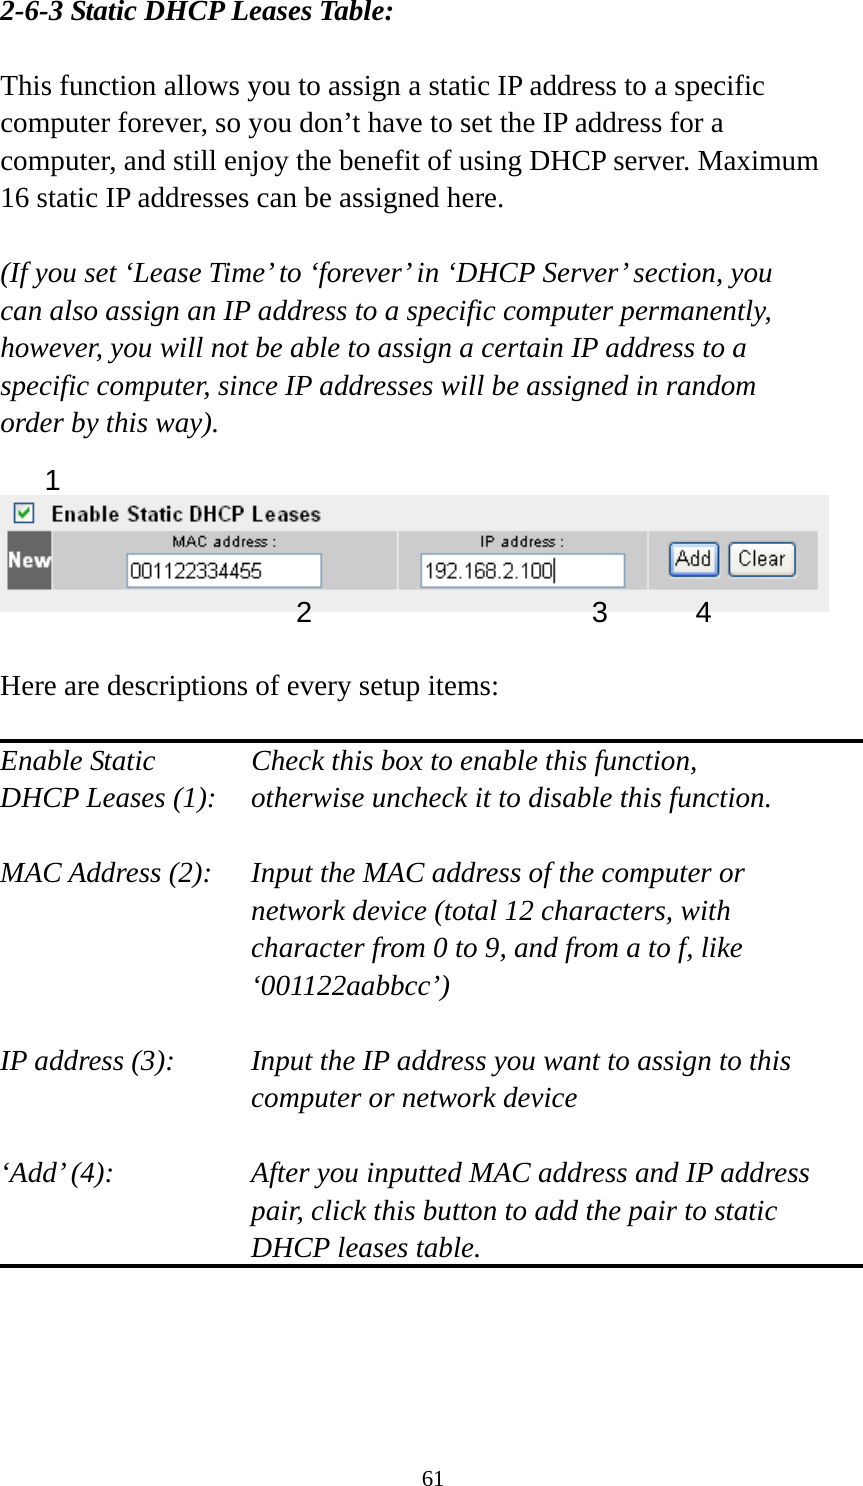 61 2-6-3 Static DHCP Leases Table:  This function allows you to assign a static IP address to a specific computer forever, so you don’t have to set the IP address for a computer, and still enjoy the benefit of using DHCP server. Maximum 16 static IP addresses can be assigned here.  (If you set ‘Lease Time’ to ‘forever’ in ‘DHCP Server’ section, you can also assign an IP address to a specific computer permanently, however, you will not be able to assign a certain IP address to a specific computer, since IP addresses will be assigned in random order by this way).      Here are descriptions of every setup items:  Enable Static      Check this box to enable this function, DHCP Leases (1):    otherwise uncheck it to disable this function.  MAC Address (2):    Input the MAC address of the computer or network device (total 12 characters, with character from 0 to 9, and from a to f, like ‘001122aabbcc’)   IP address (3):    Input the IP address you want to assign to this computer or network device    ‘Add’ (4):    After you inputted MAC address and IP address pair, click this button to add the pair to static DHCP leases table.     1 2 3 4 